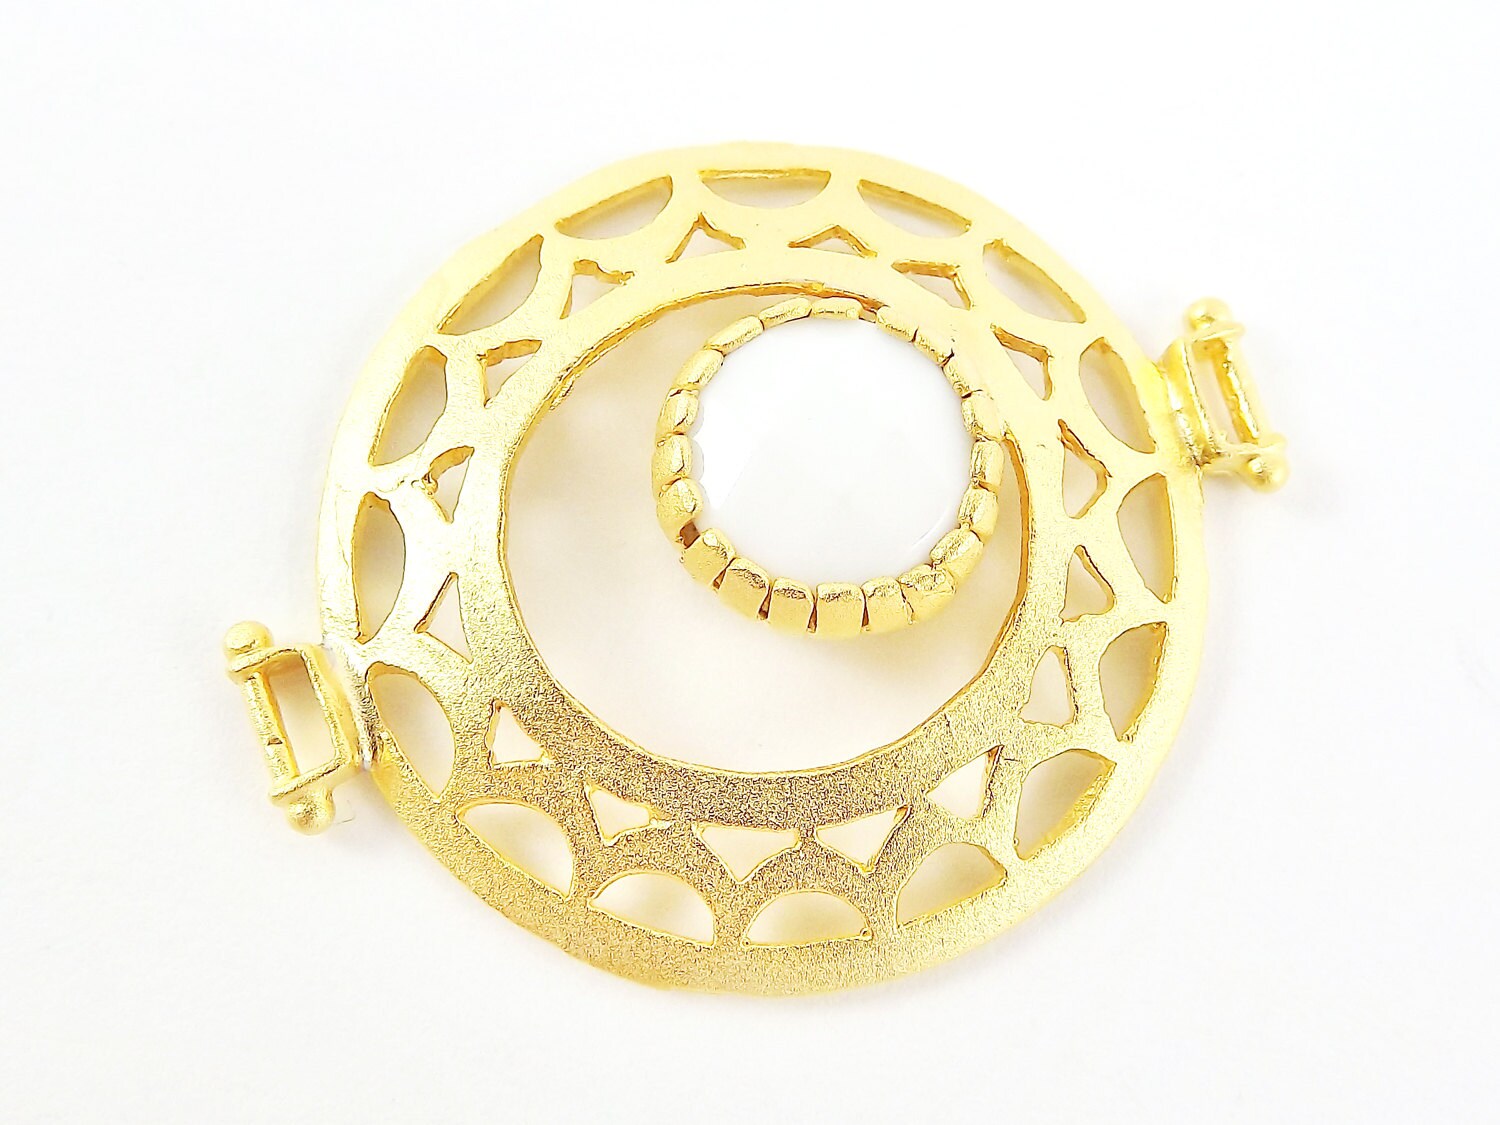 White Gemstone Connector, Opaque White Jade Stone Fretworked Circle Connector Pendant - 22k Matte Gold Plated - 1PC